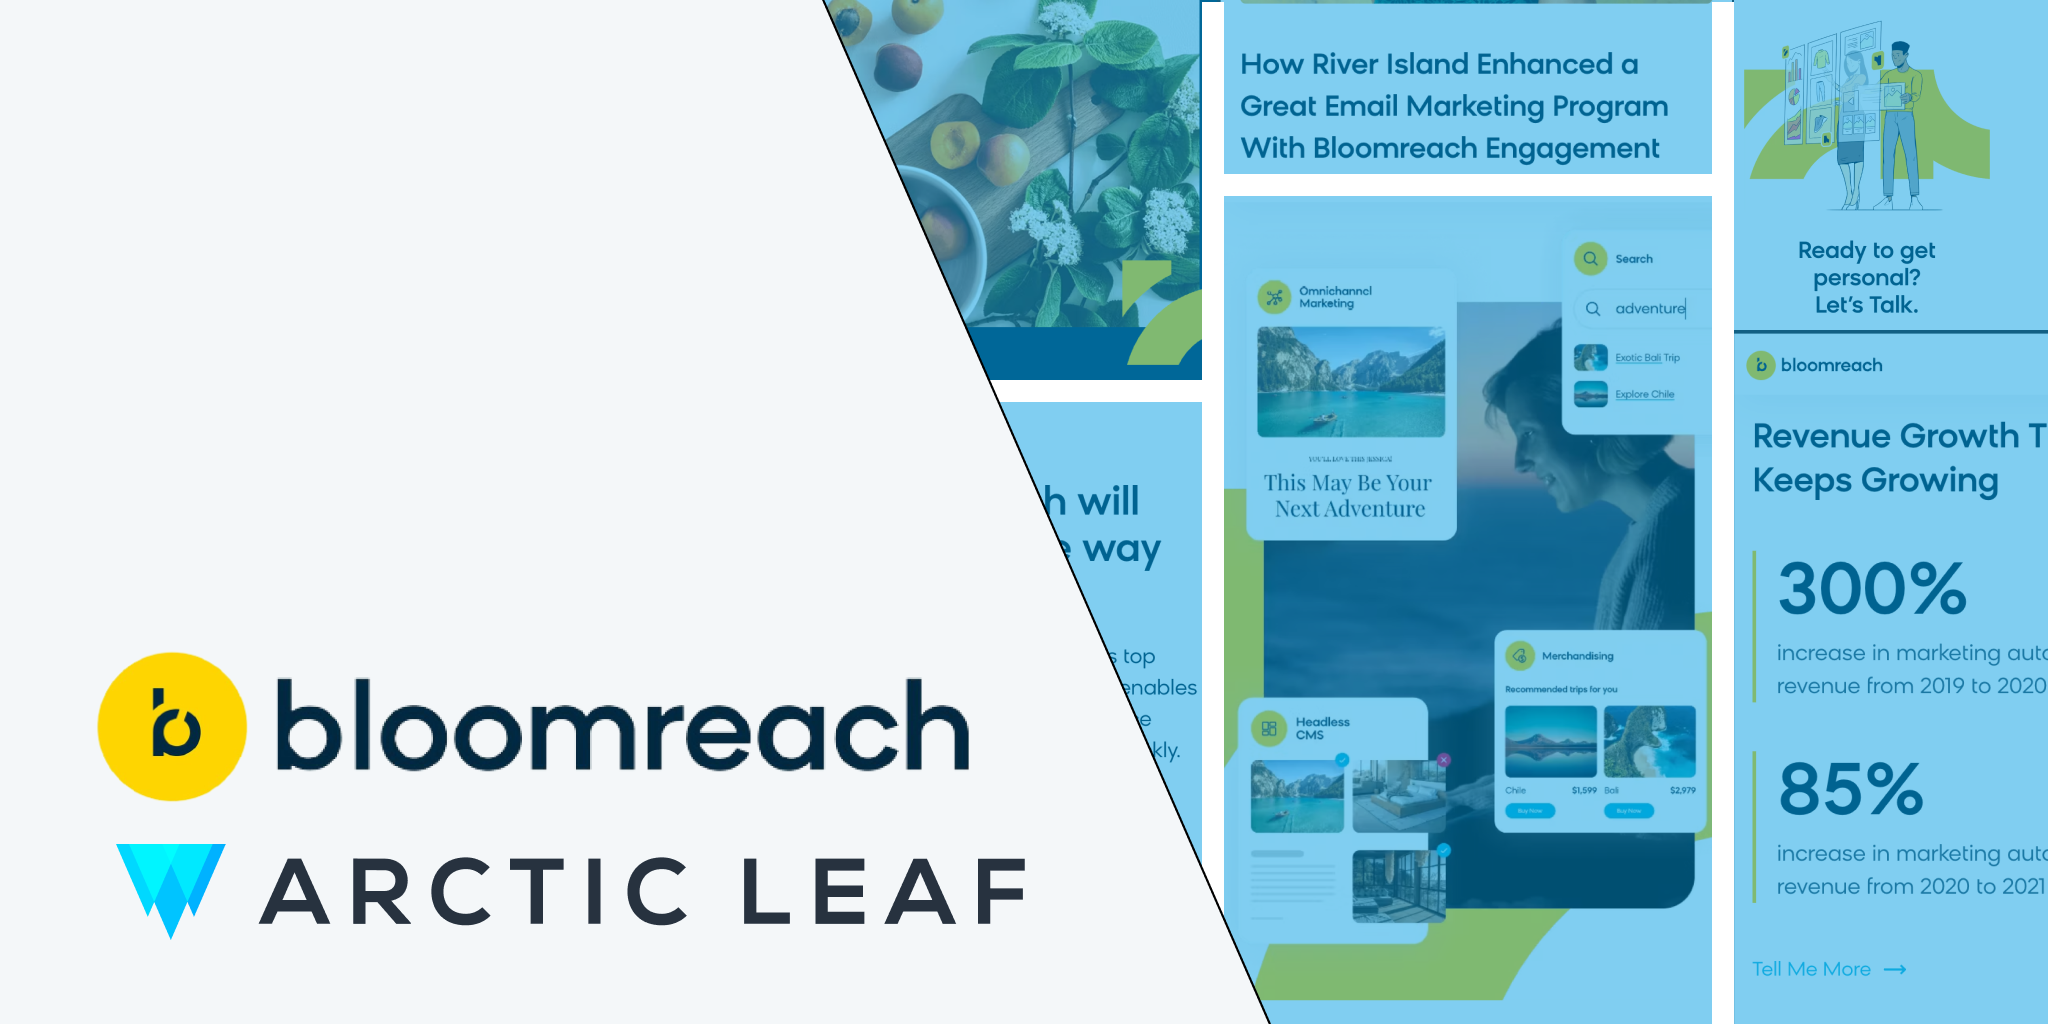 Bloomreach and Arctic Leaf partnership announcement